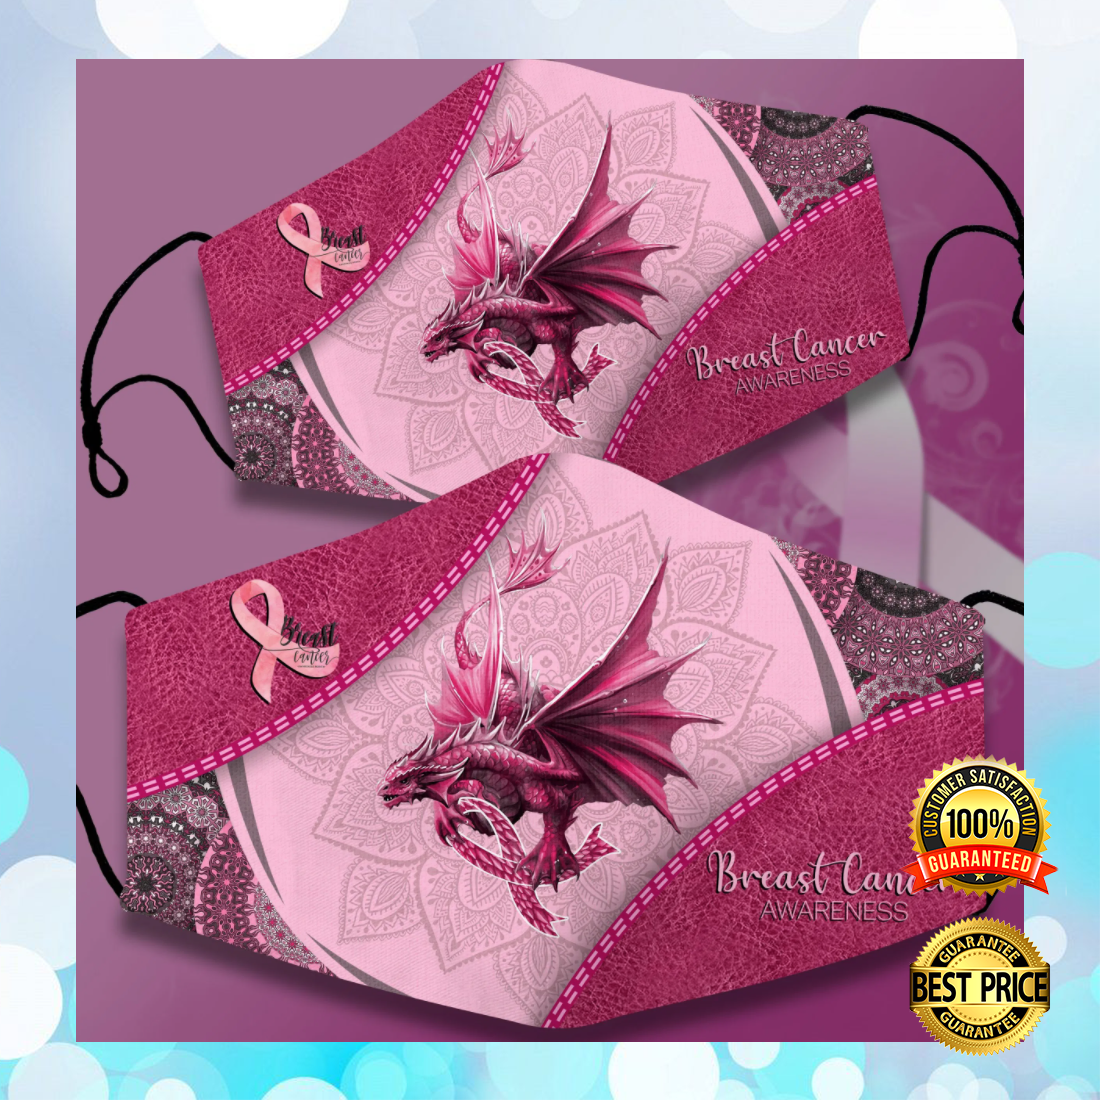 Dragon breast cancer awareness face mask 5